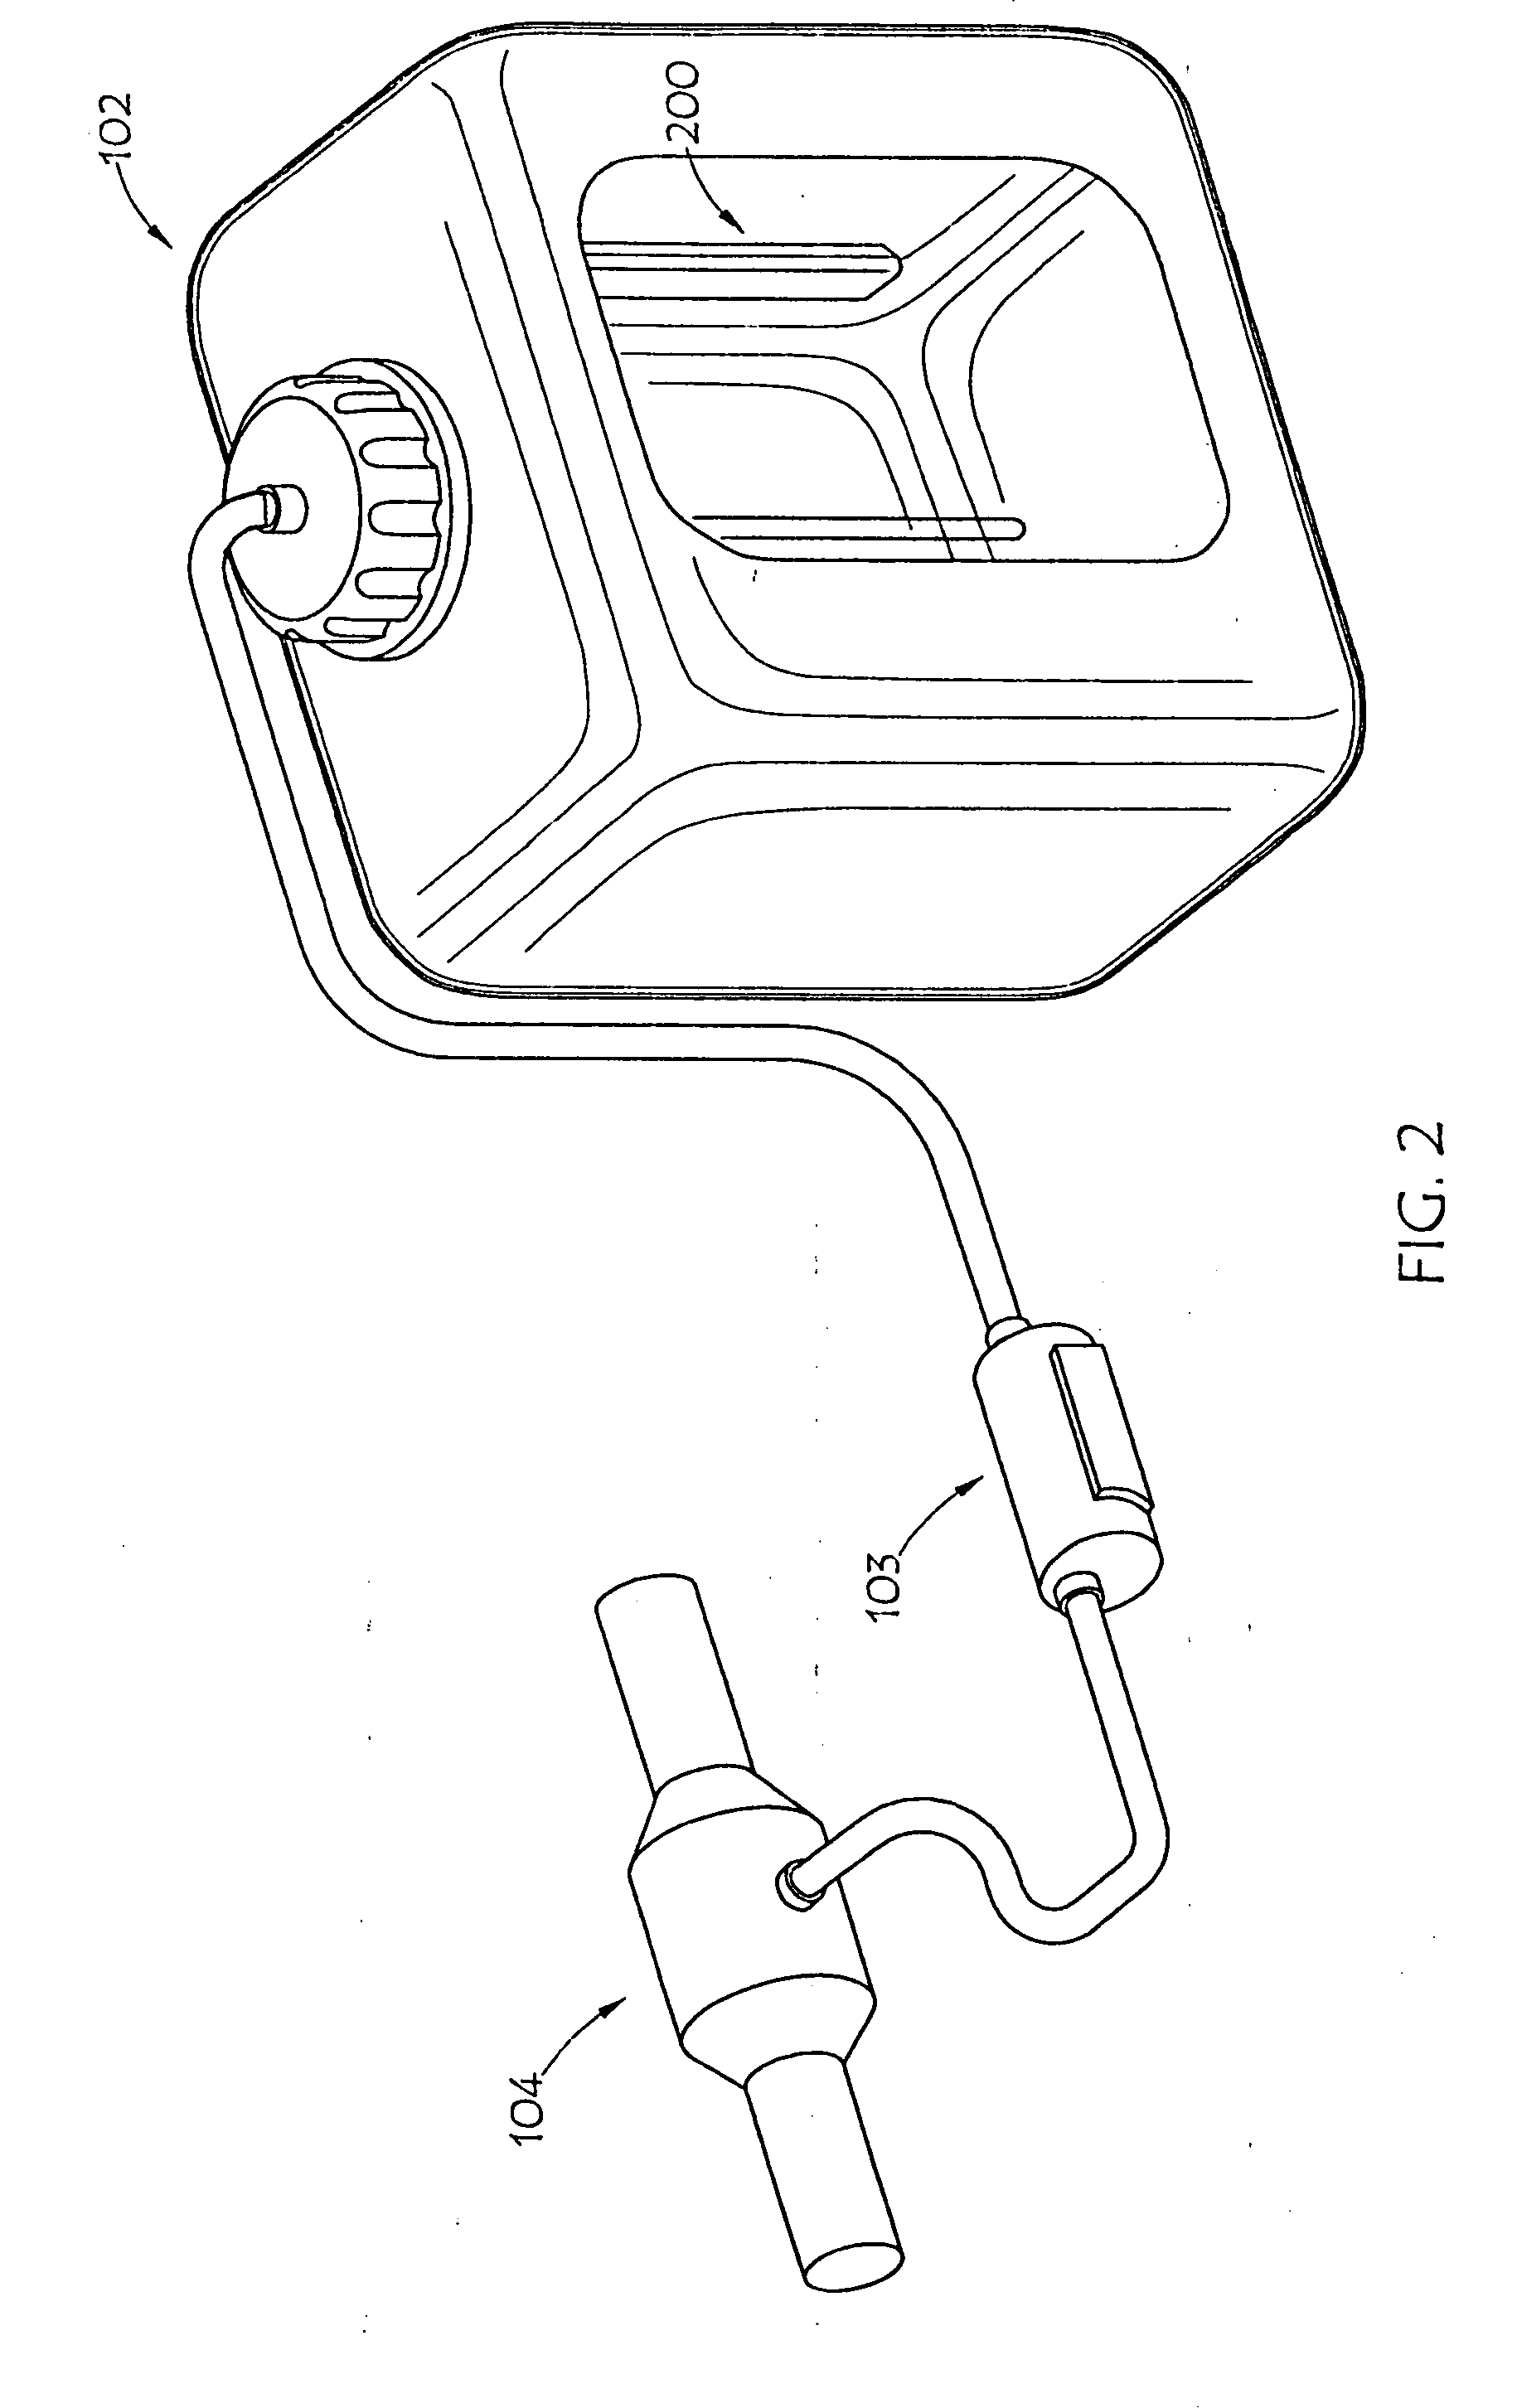 Liquid level and quality sensing apparatus, systems and methods using EMF wave propagation